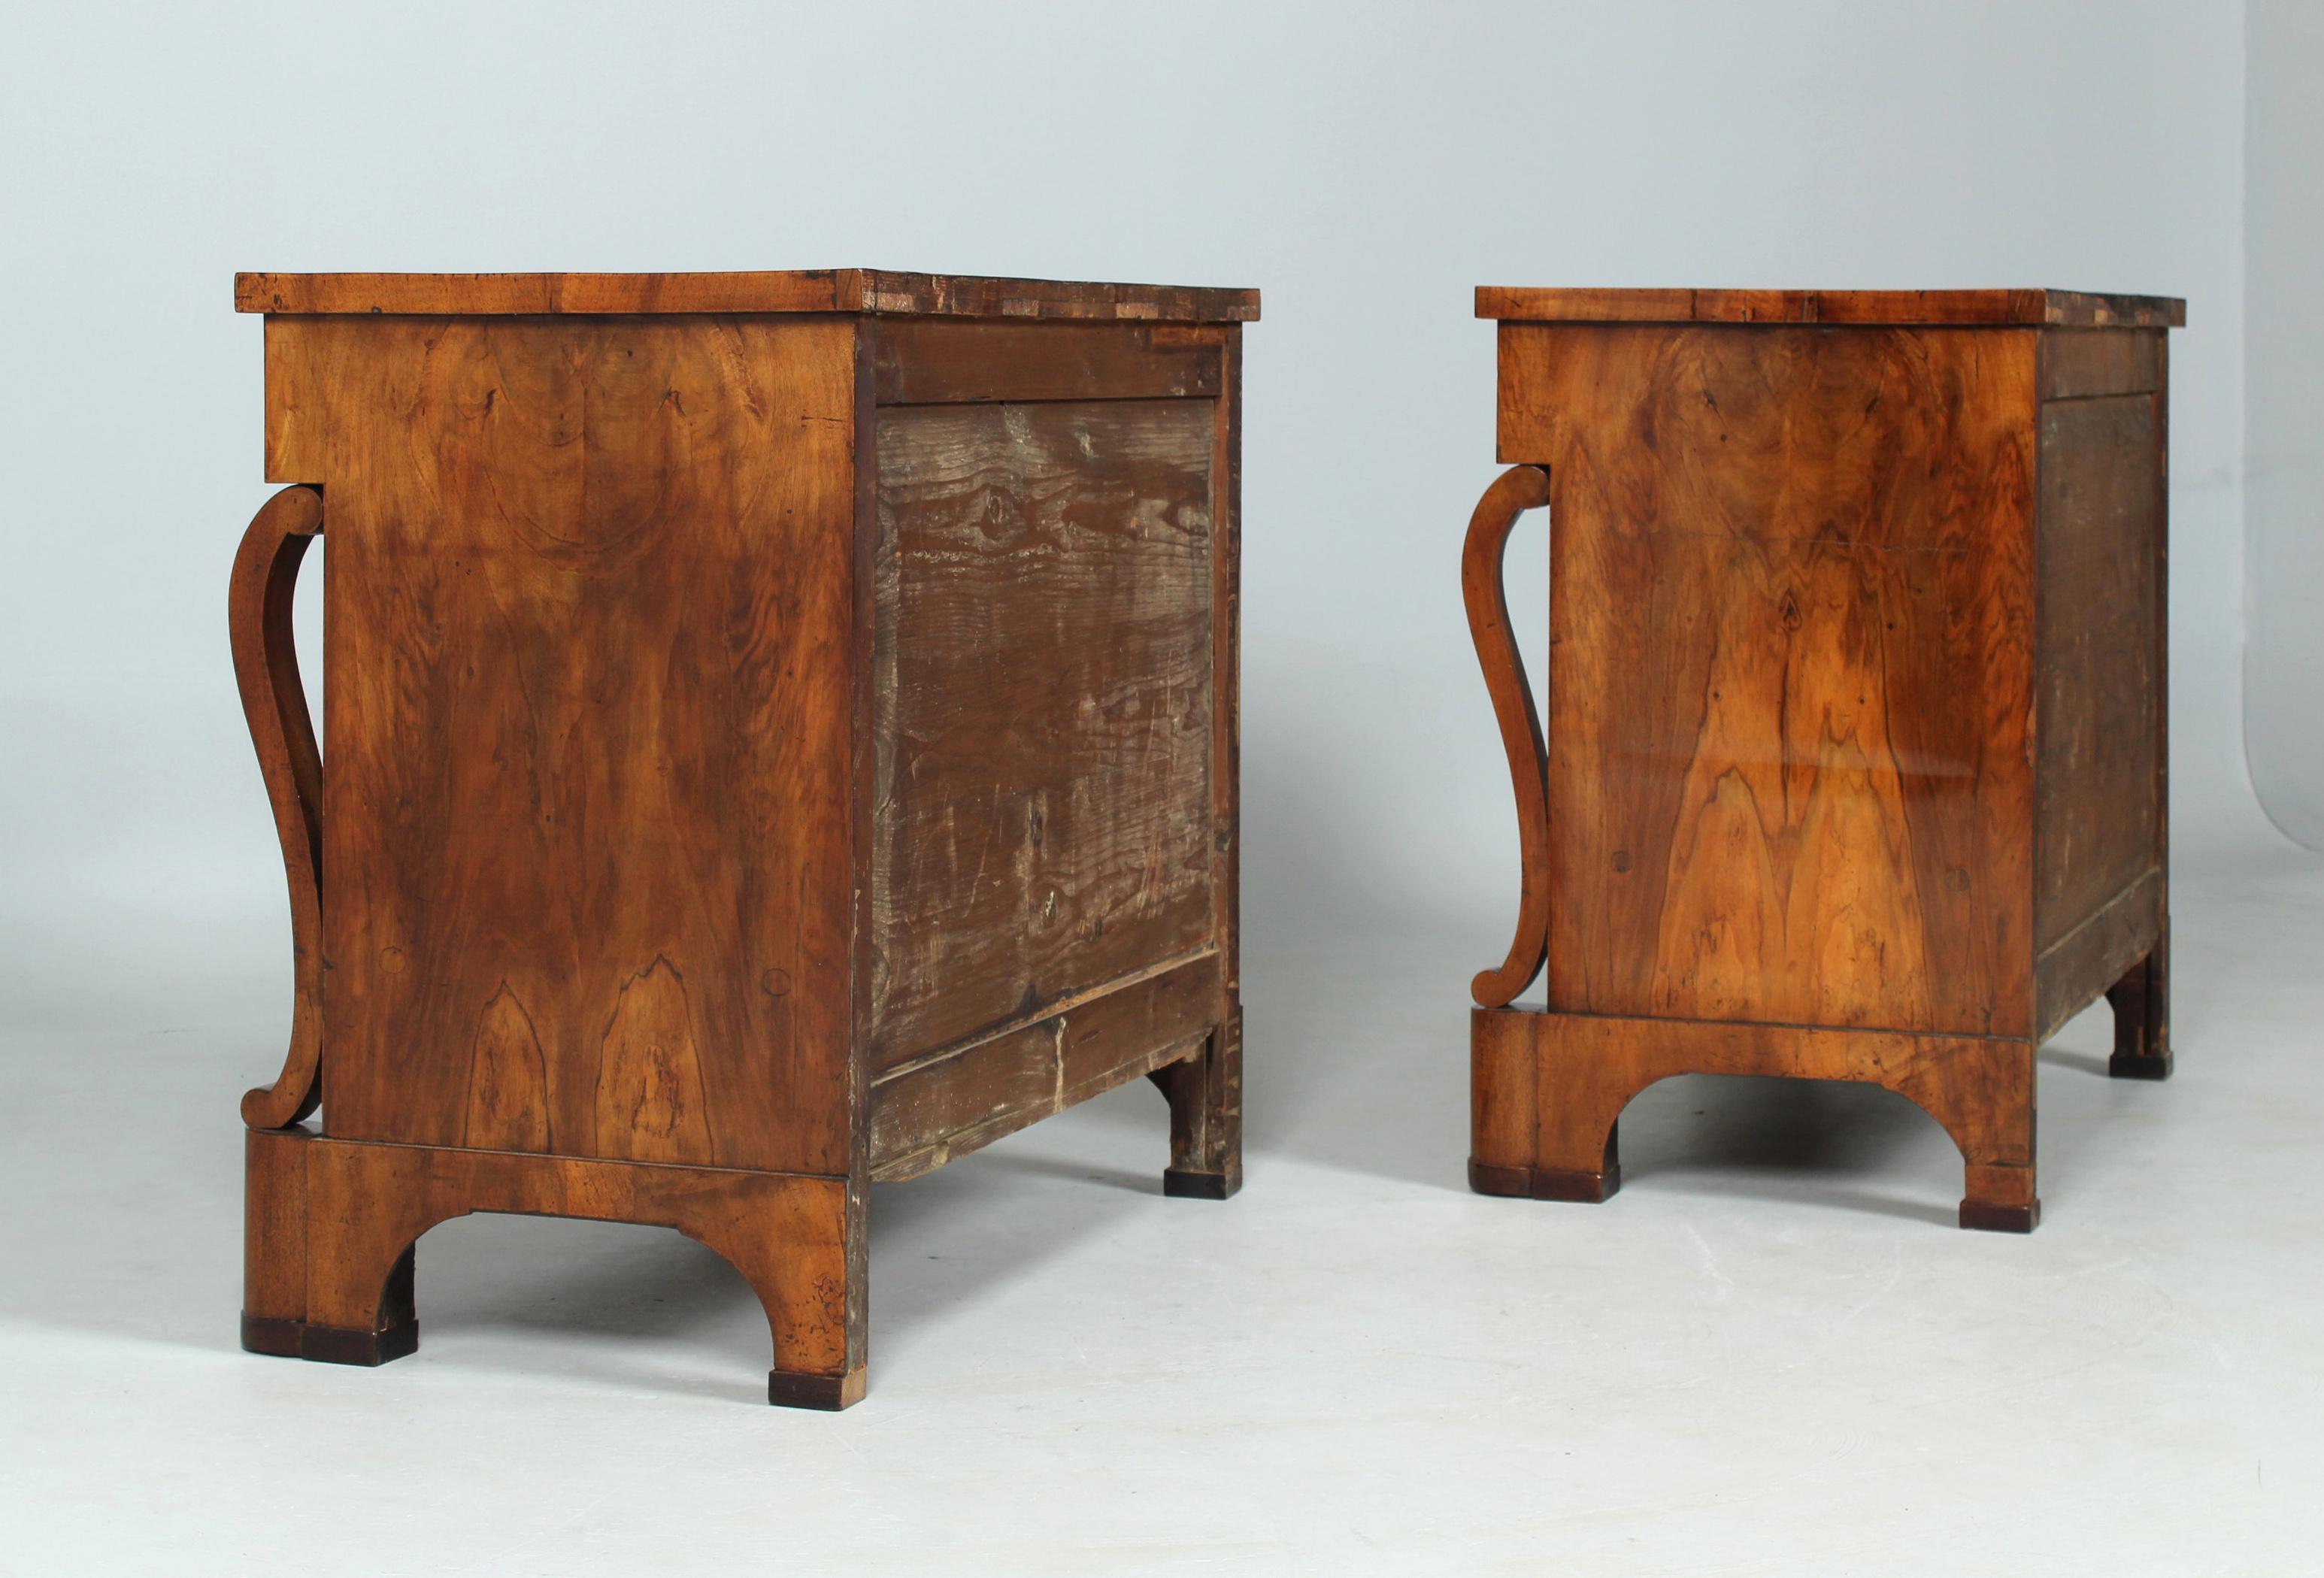 Pair of Early 19th Century Biedermeier Chests or Sideboards, Walnut, c. 1825 12